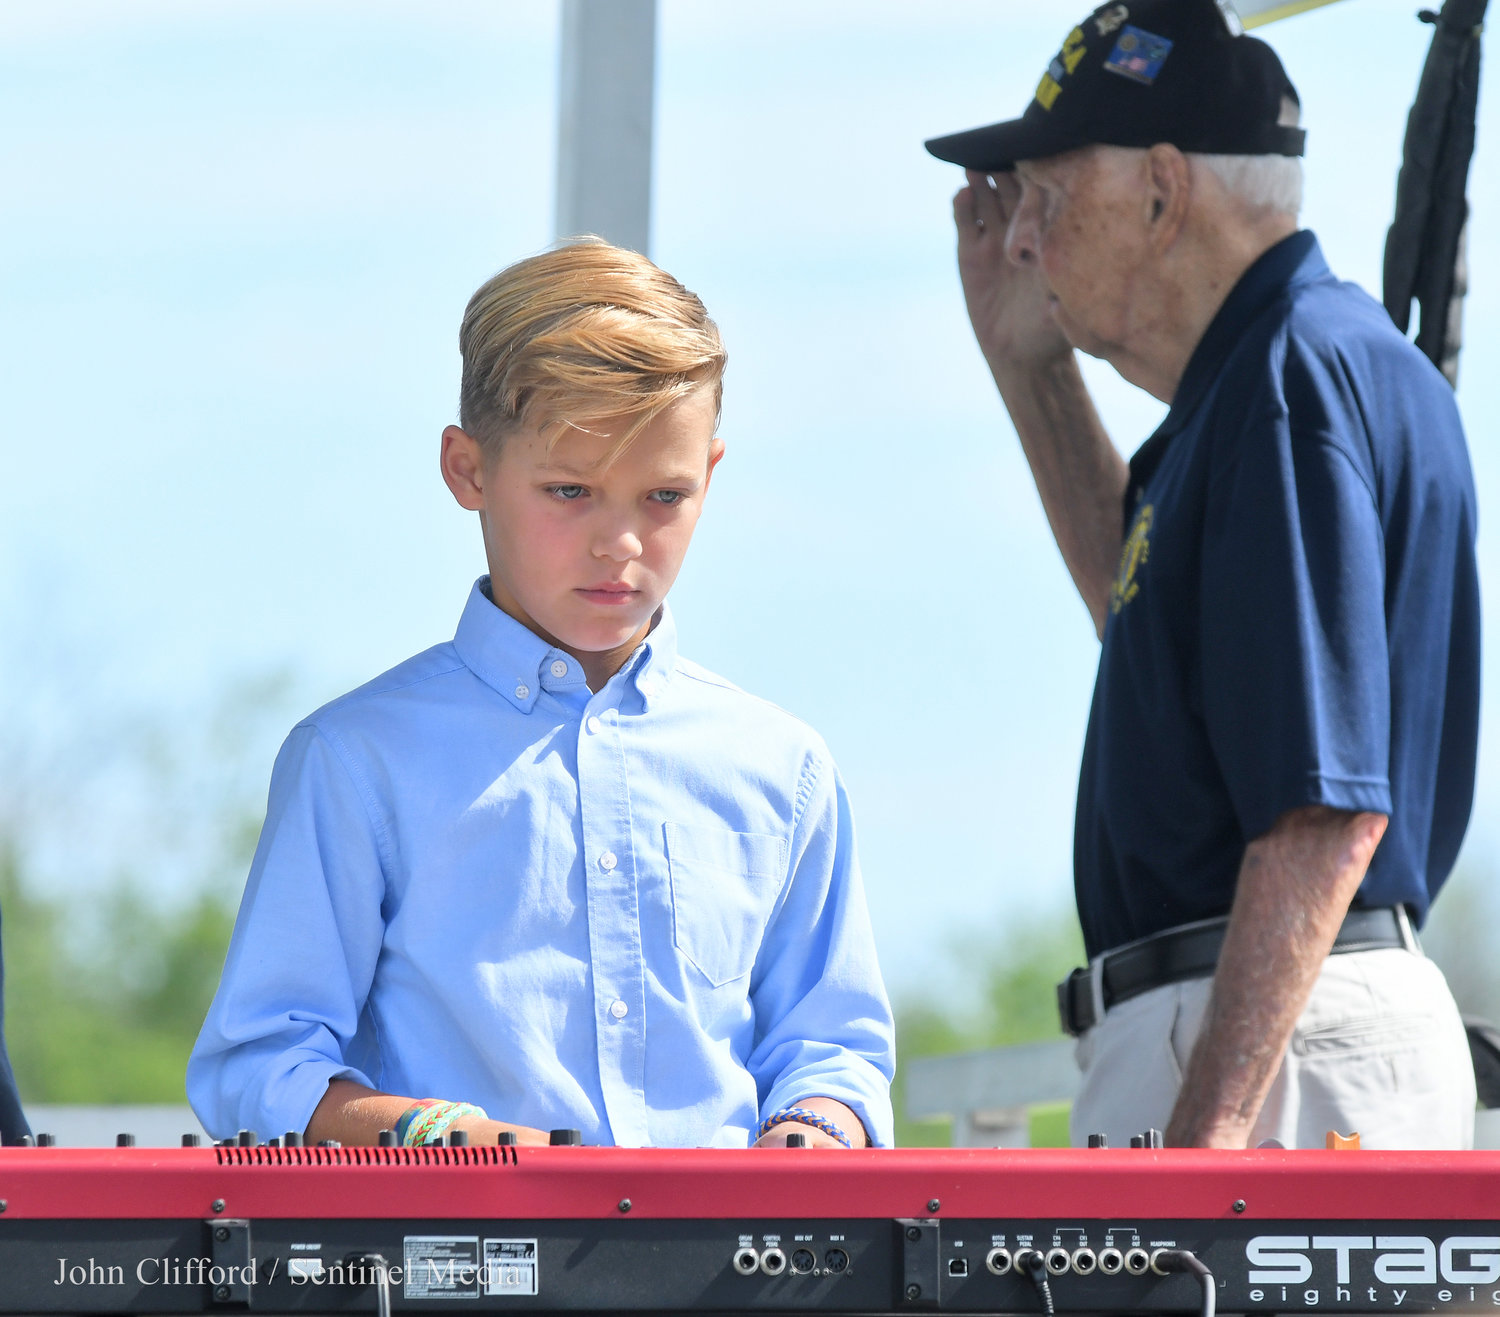 Ben Kidwell performed the National Anthem on the piano for the dedication ceremony.